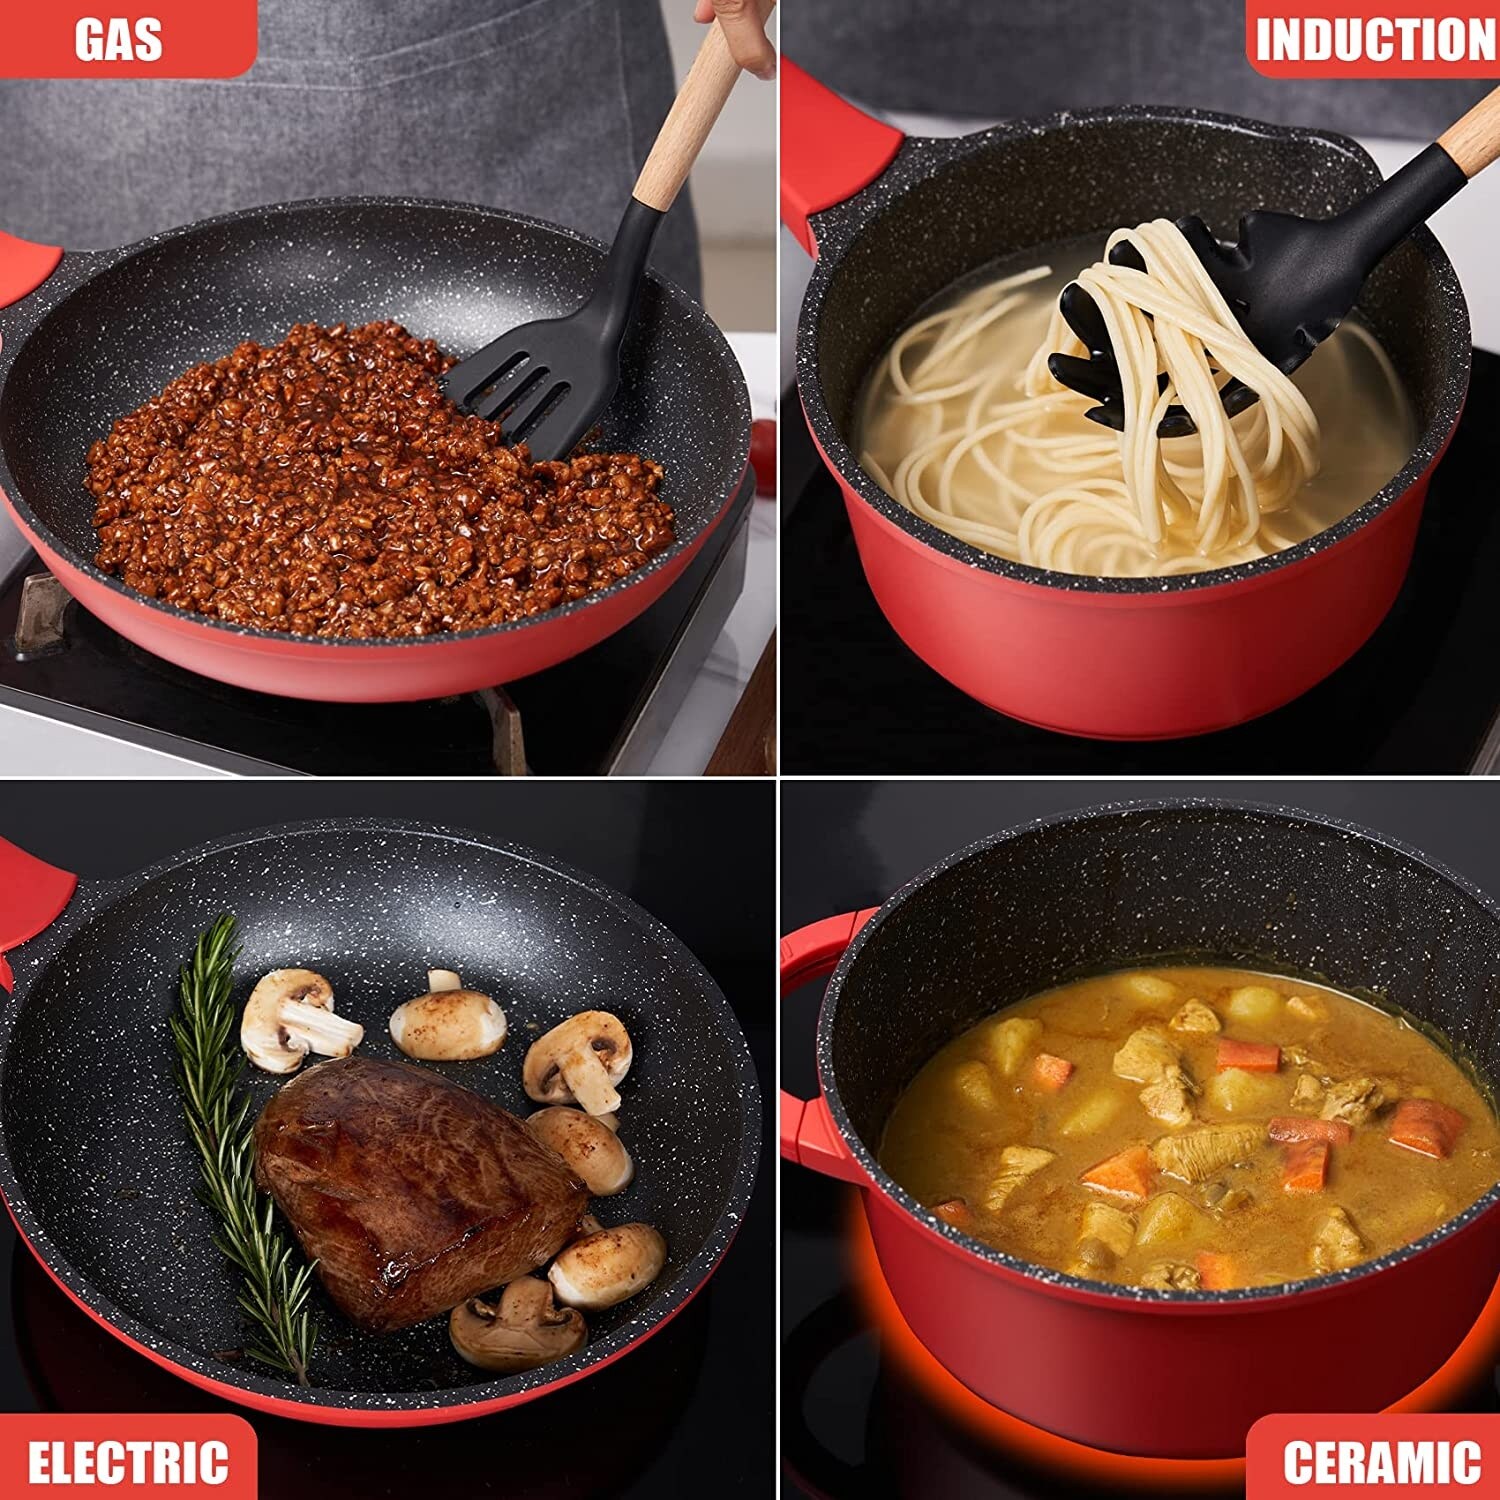 https://ak1.ostkcdn.com/images/products/is/images/direct/4b20040838cb4449a5f85cd3a877276900434c29/Pots-and-Pans-Set-Nonstick%2C-16-Piece-Nonstick-Kitchen-Cookware-Sets%2C-Easy-Clean-Cooking-Pot-Pan-Set.jpg